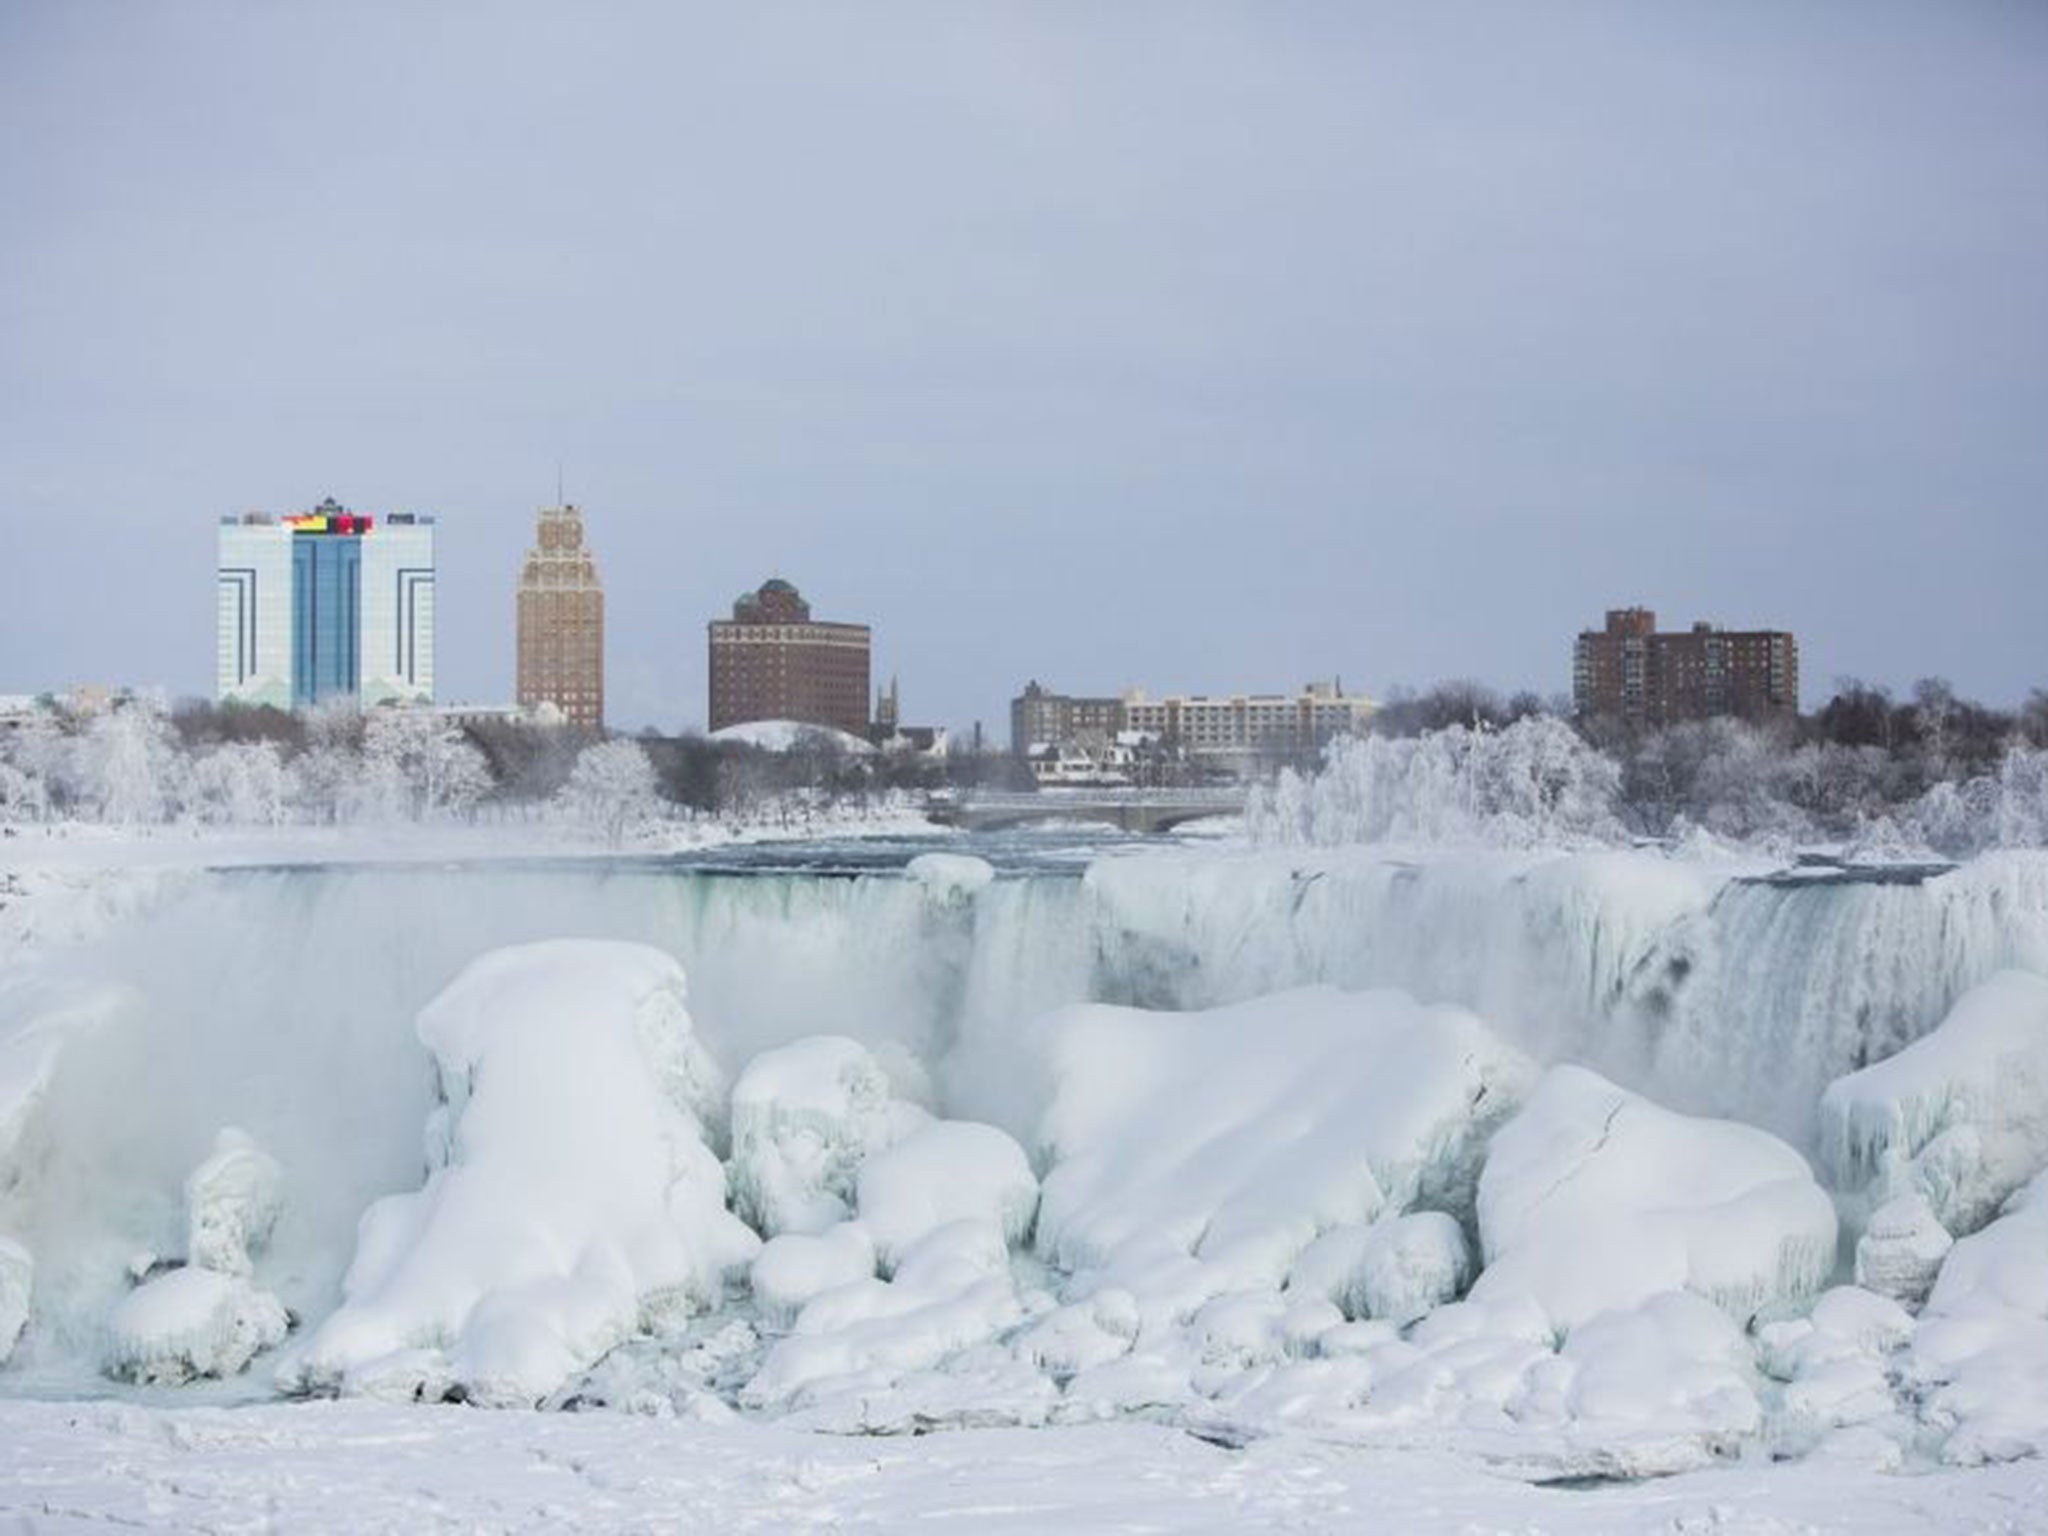 A partially frozen Falls in sub freezing temperatures is seen in Niagara Falls